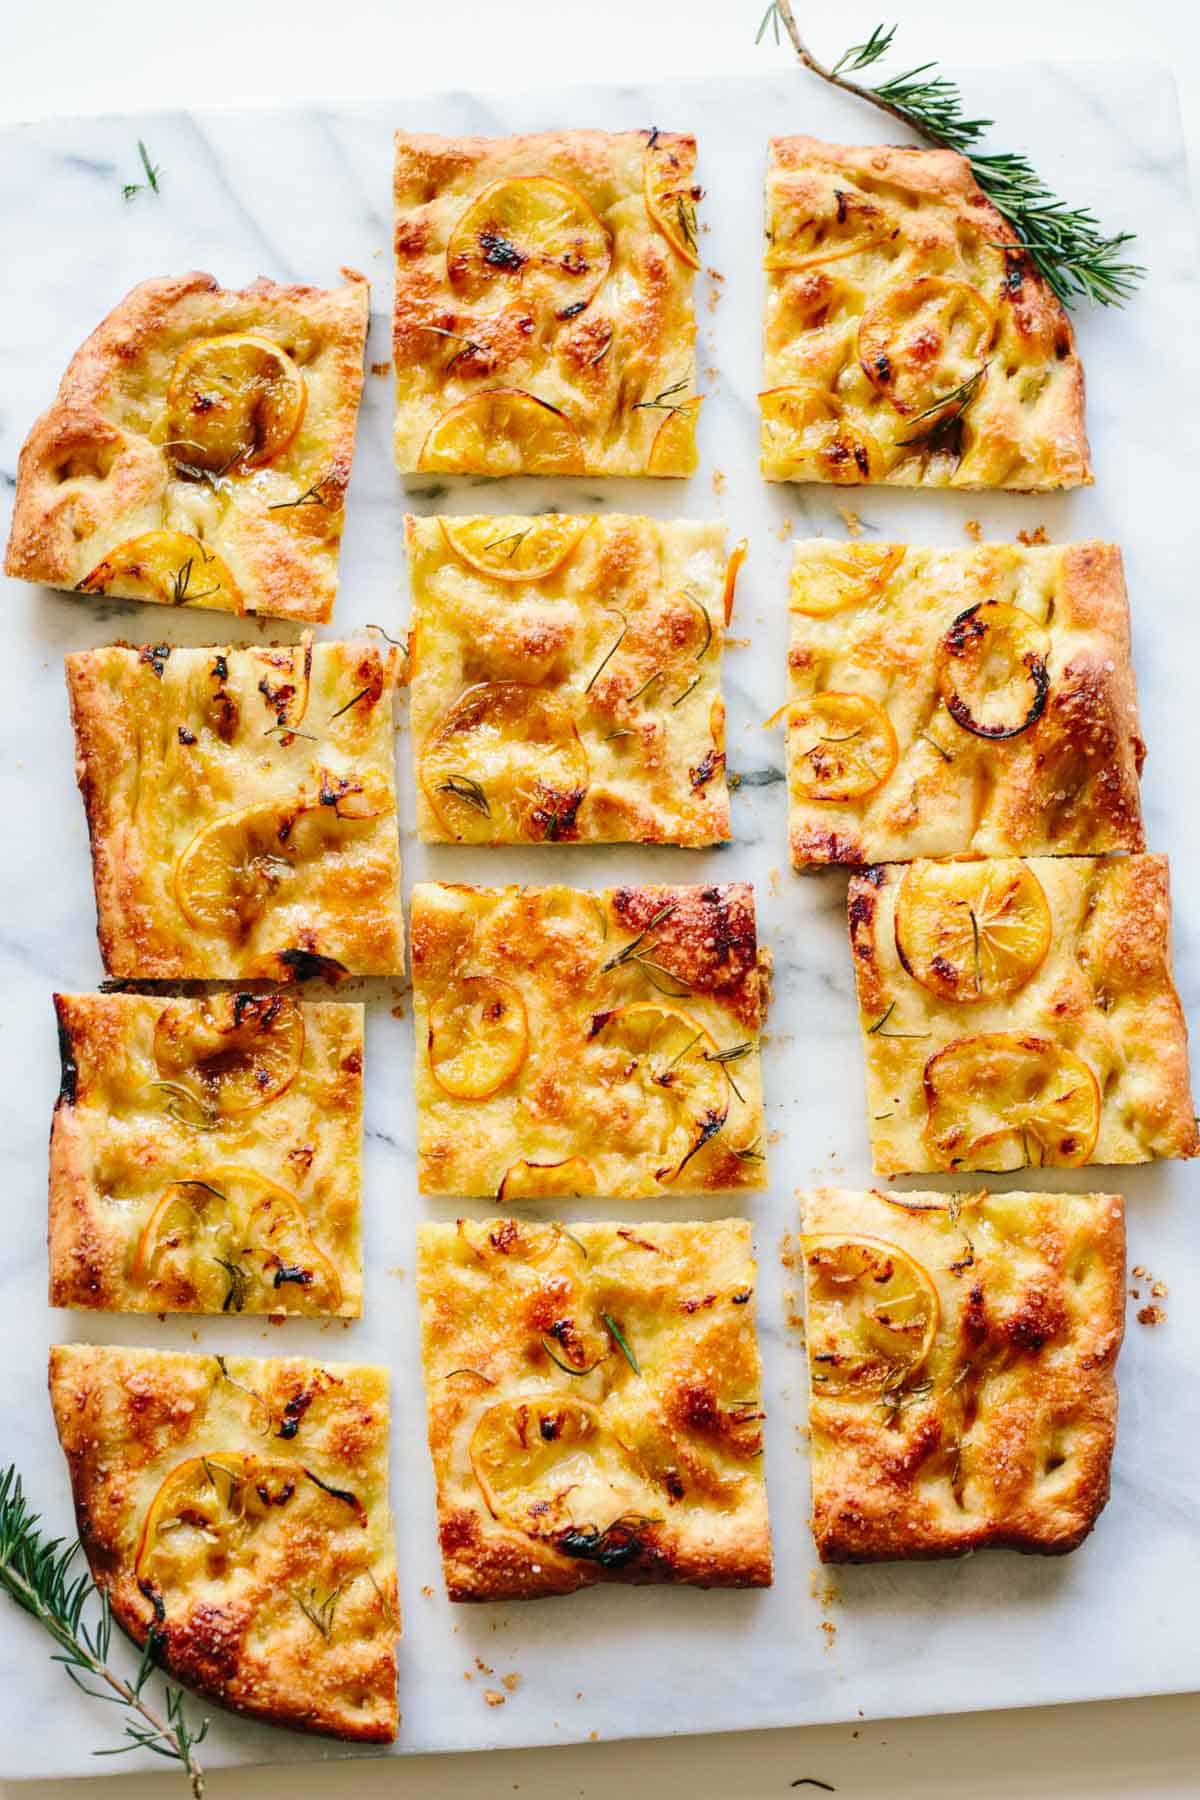 A whole focaccia cut into pieces with thinly sliced lemon and rosemary ont op.